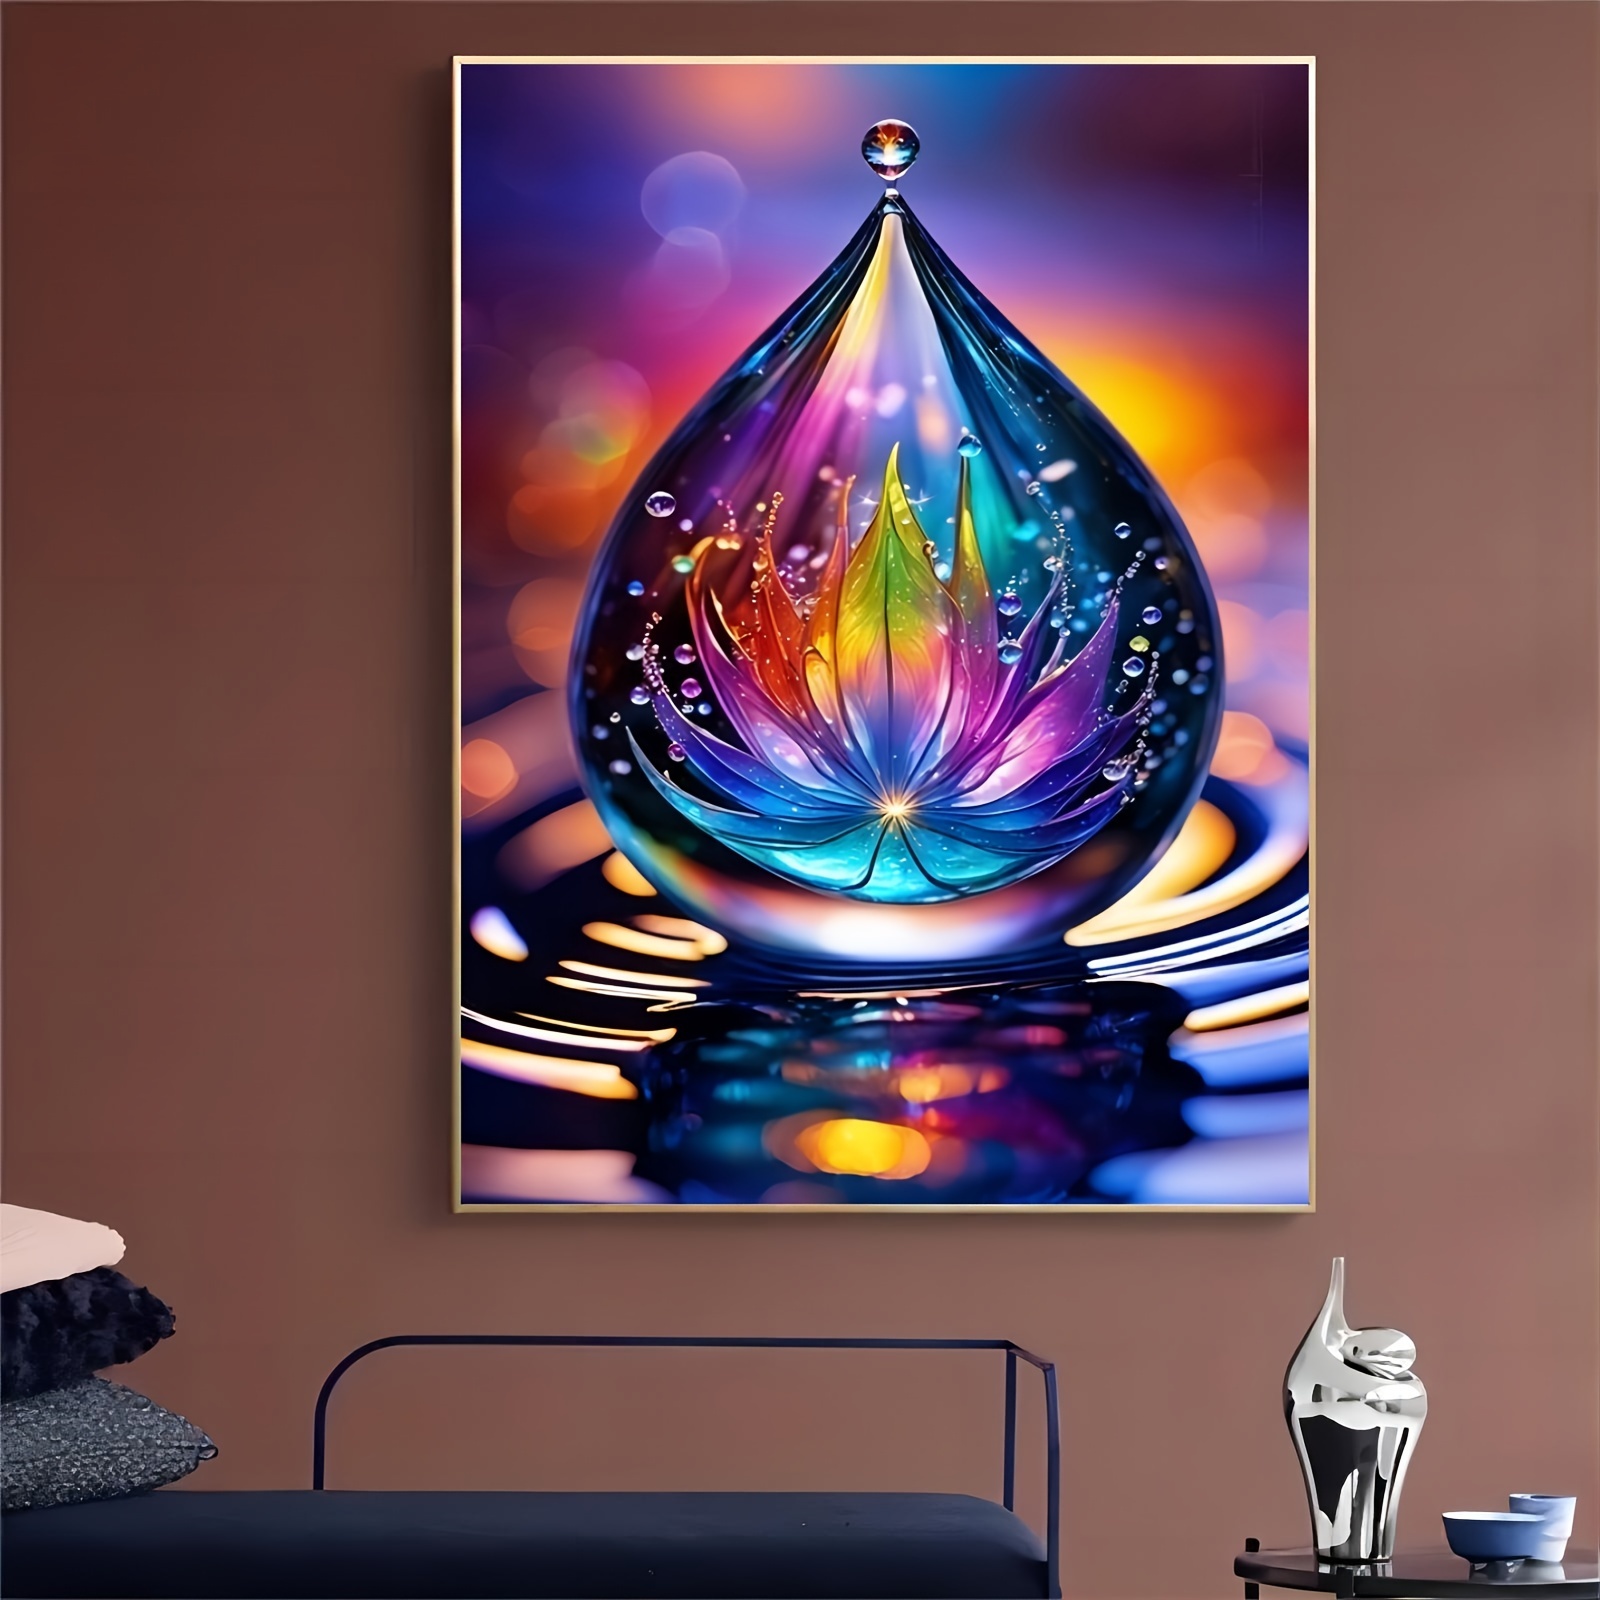 

Fountain Of Life 5d Diy Diamond Painting Kit - Full Drill Round Crystal Rhinestone Embroidery Craft Set For Home Wall Decor, 11.8" X 15.7" Canvas